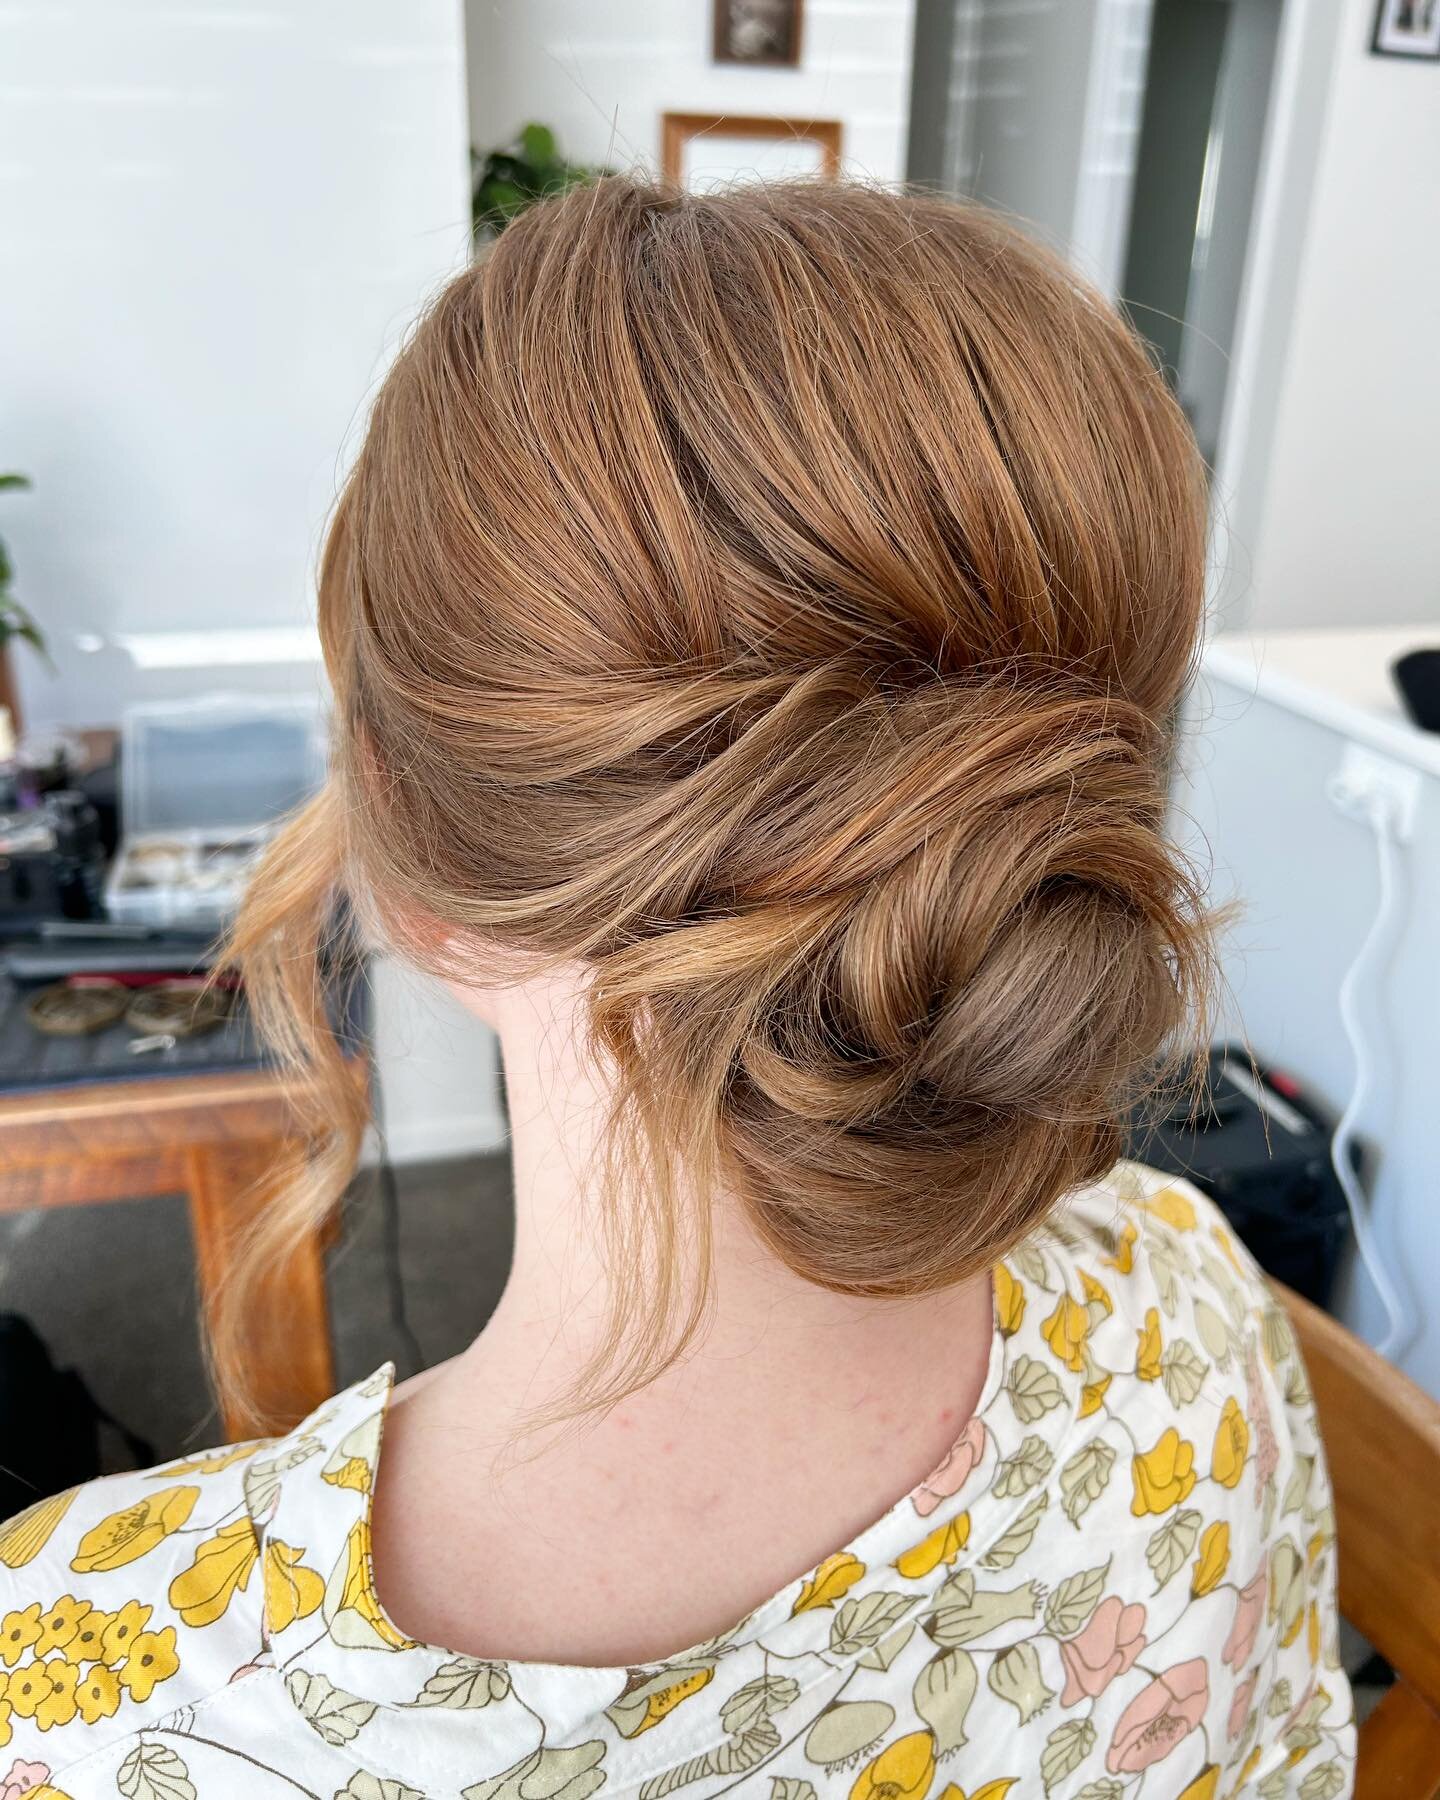 Soft tousled updo for @tailsyrosie bridesmaid ✨ 

I love being back into wedding season, brings me so much joy working with you all and creating beautiful hair 🤍